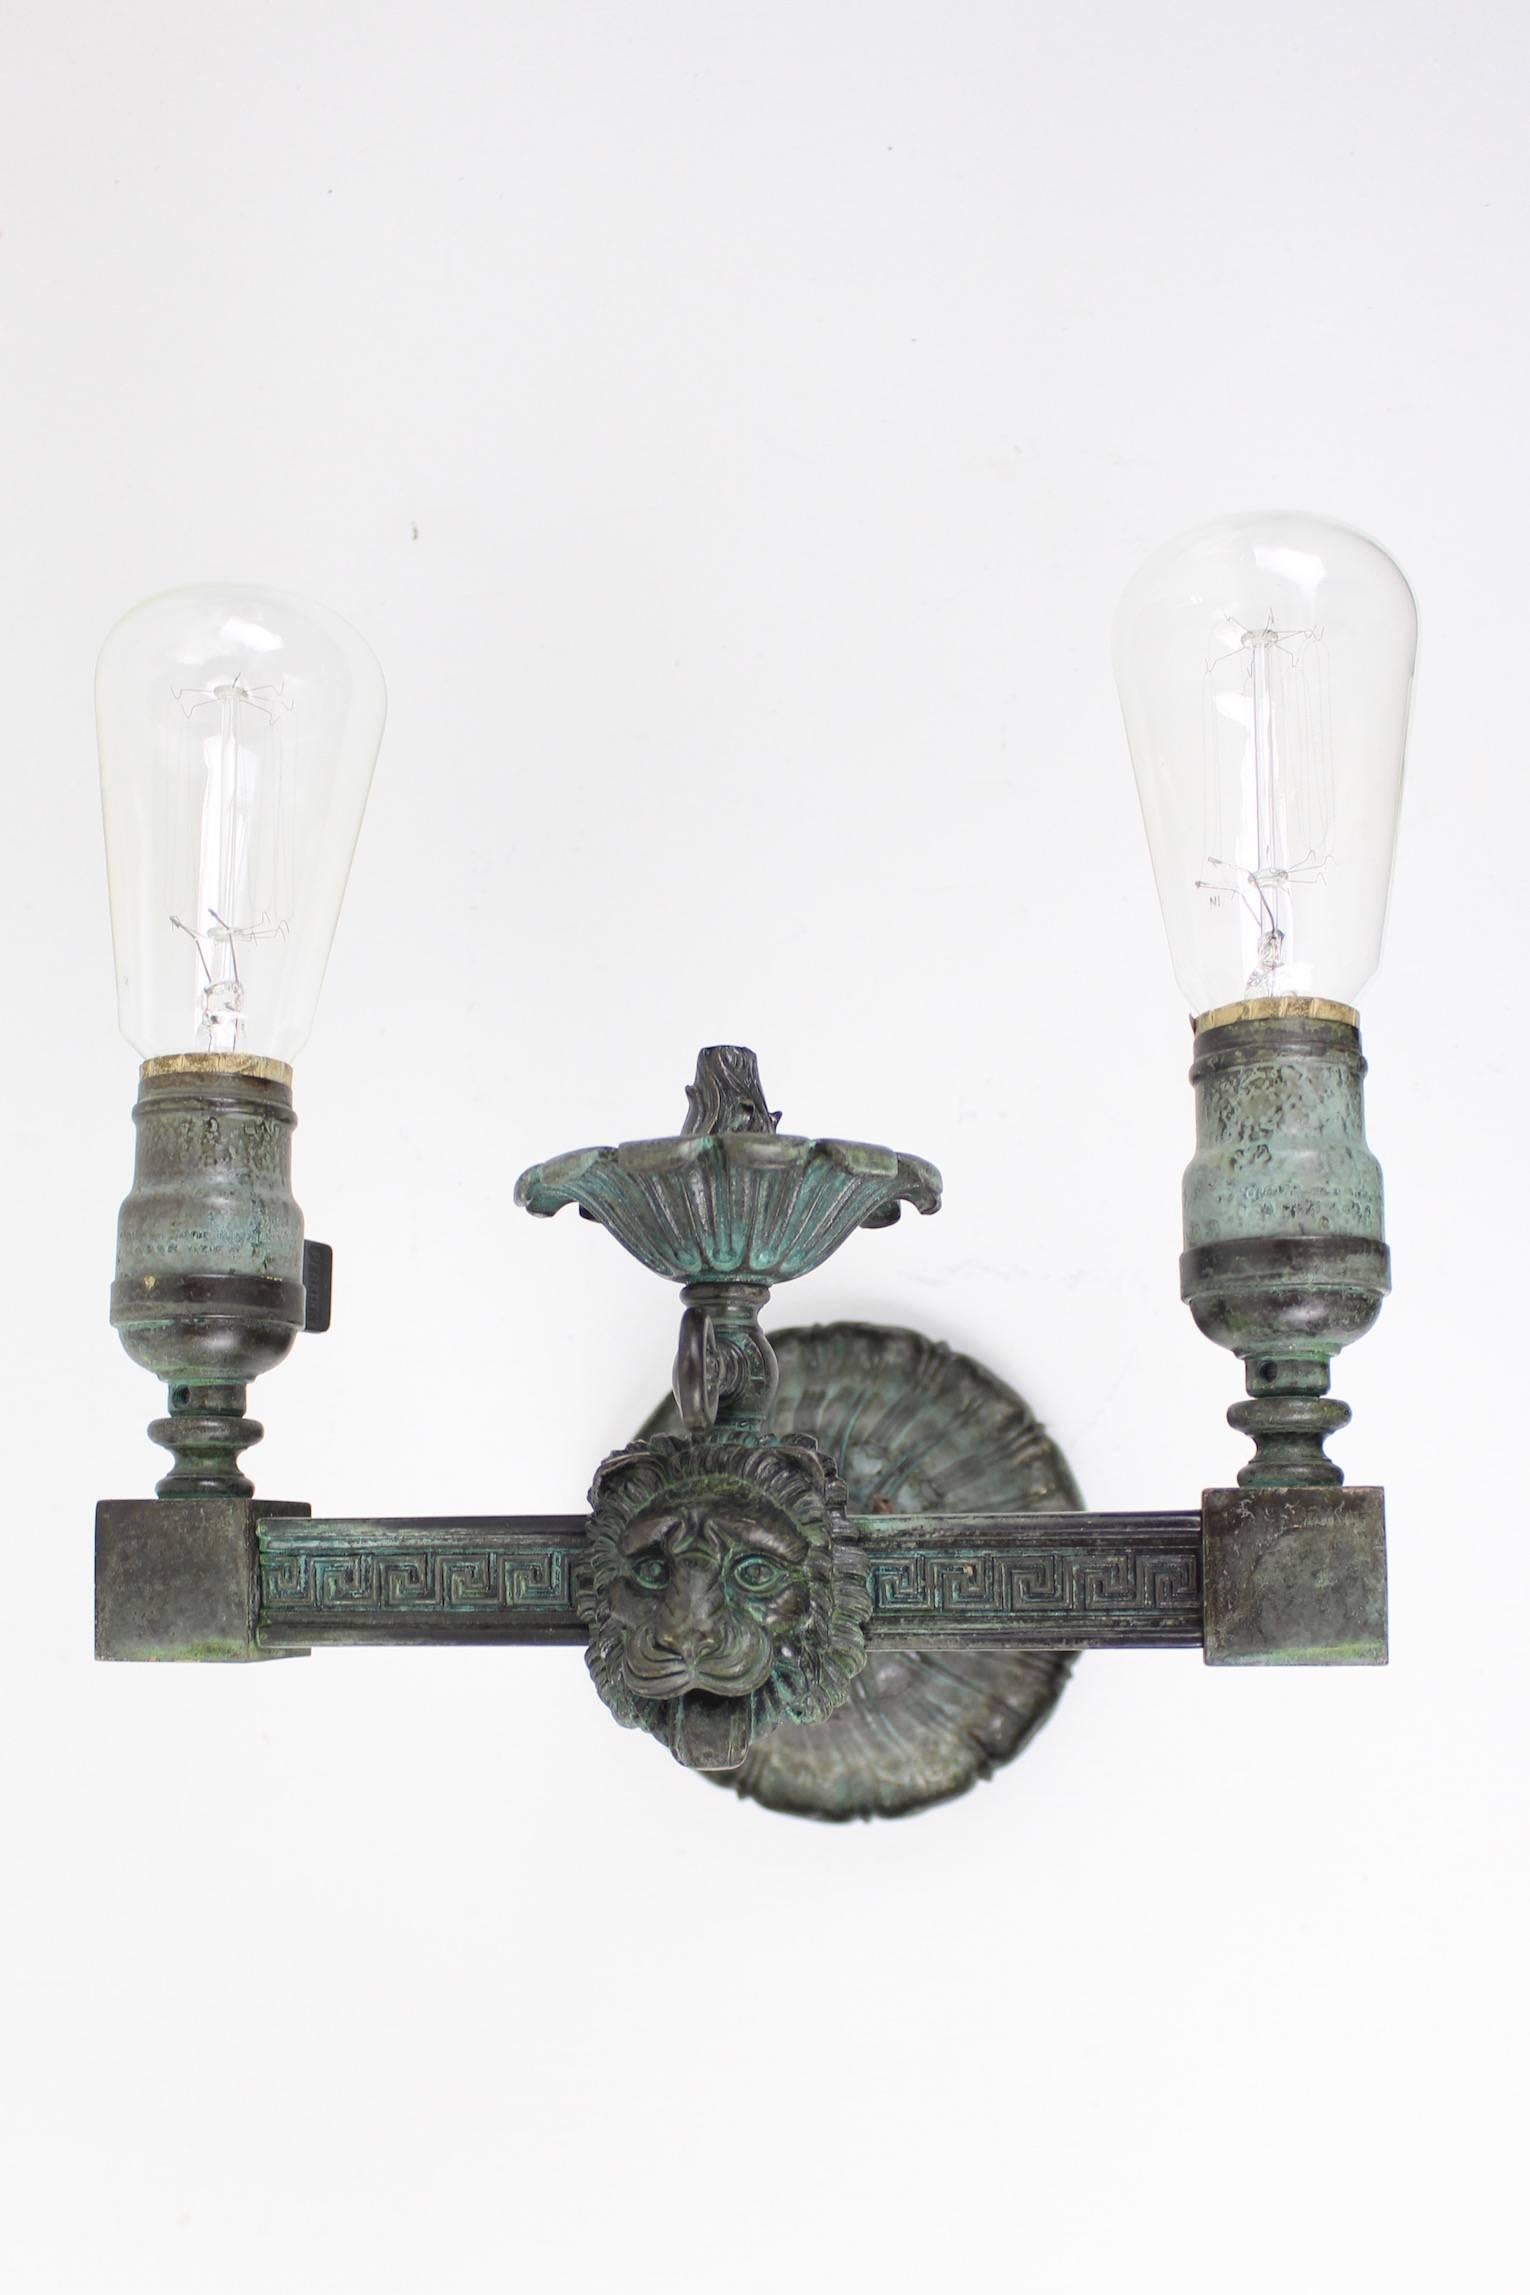 This pair of lion double-arm sconces feature a happy open-mouthed lion - tongue and all! Styled in Greek Revival with a 'Greek key' motif, circa 1910. Made out of cast and milled brass - heavy like bronze. Converted from gas to electric. These were